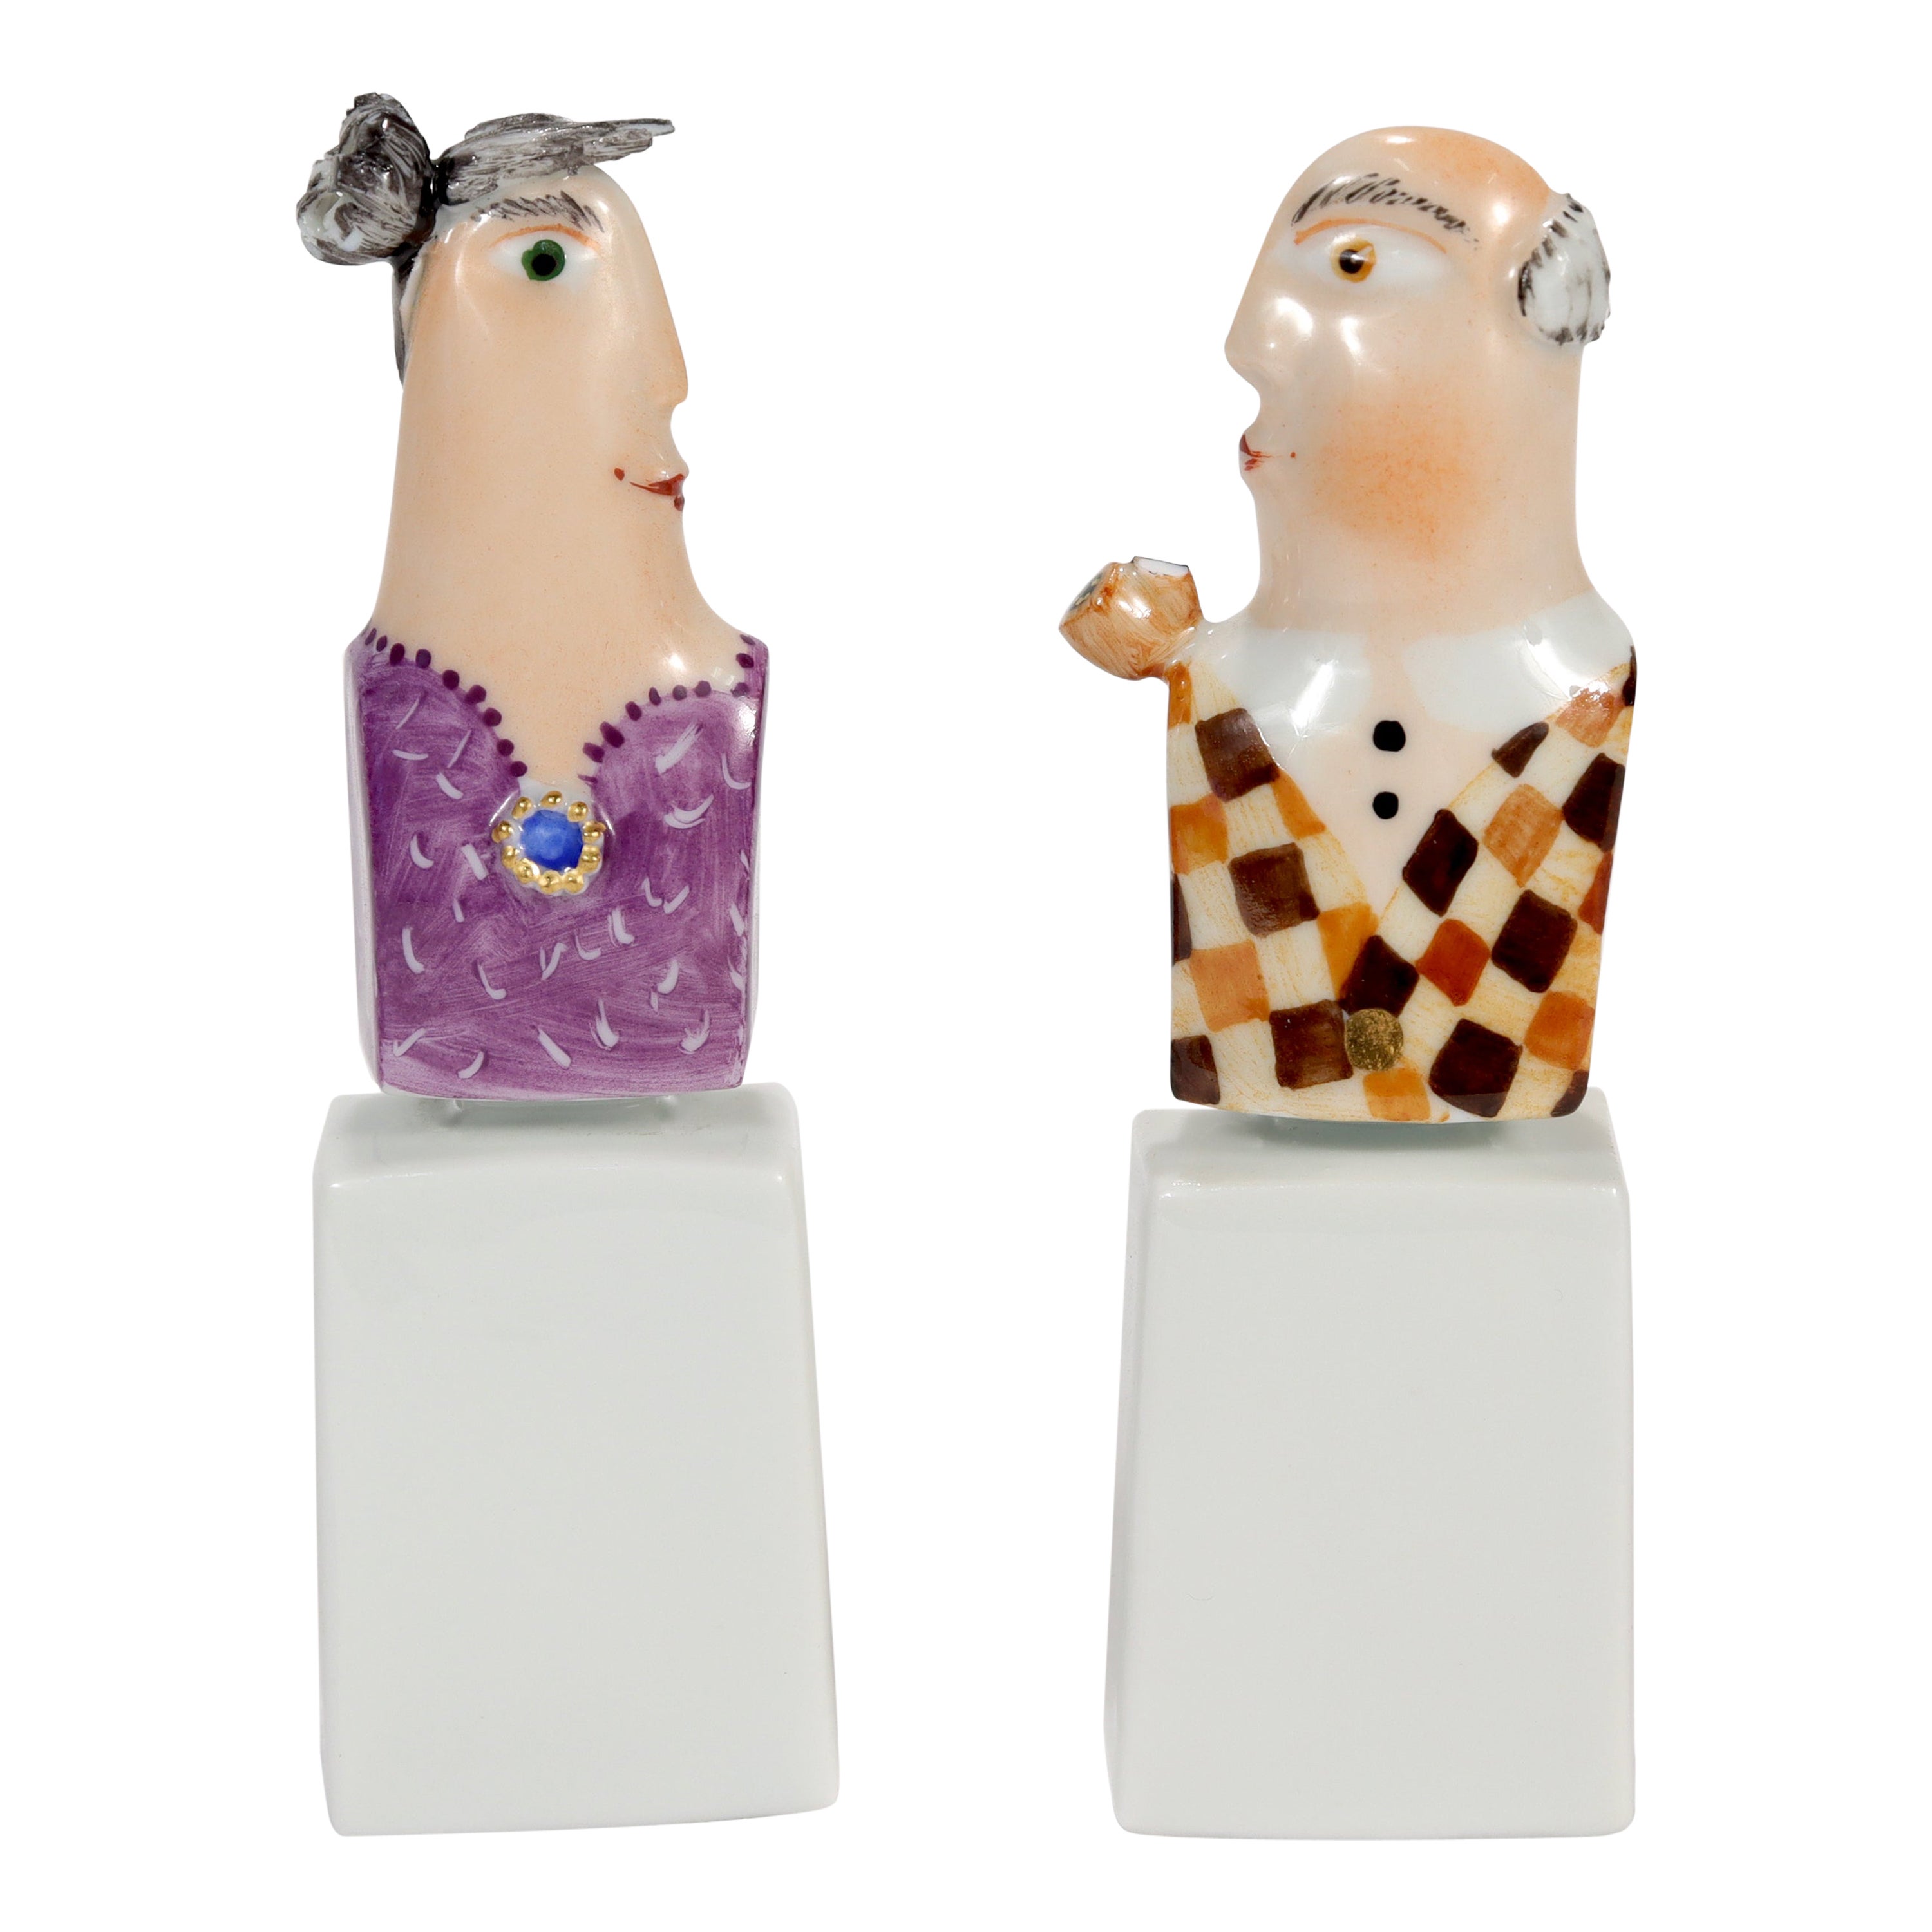 Meissen Porcelain Figurine Busts of a Man & Woman by Peter Strang